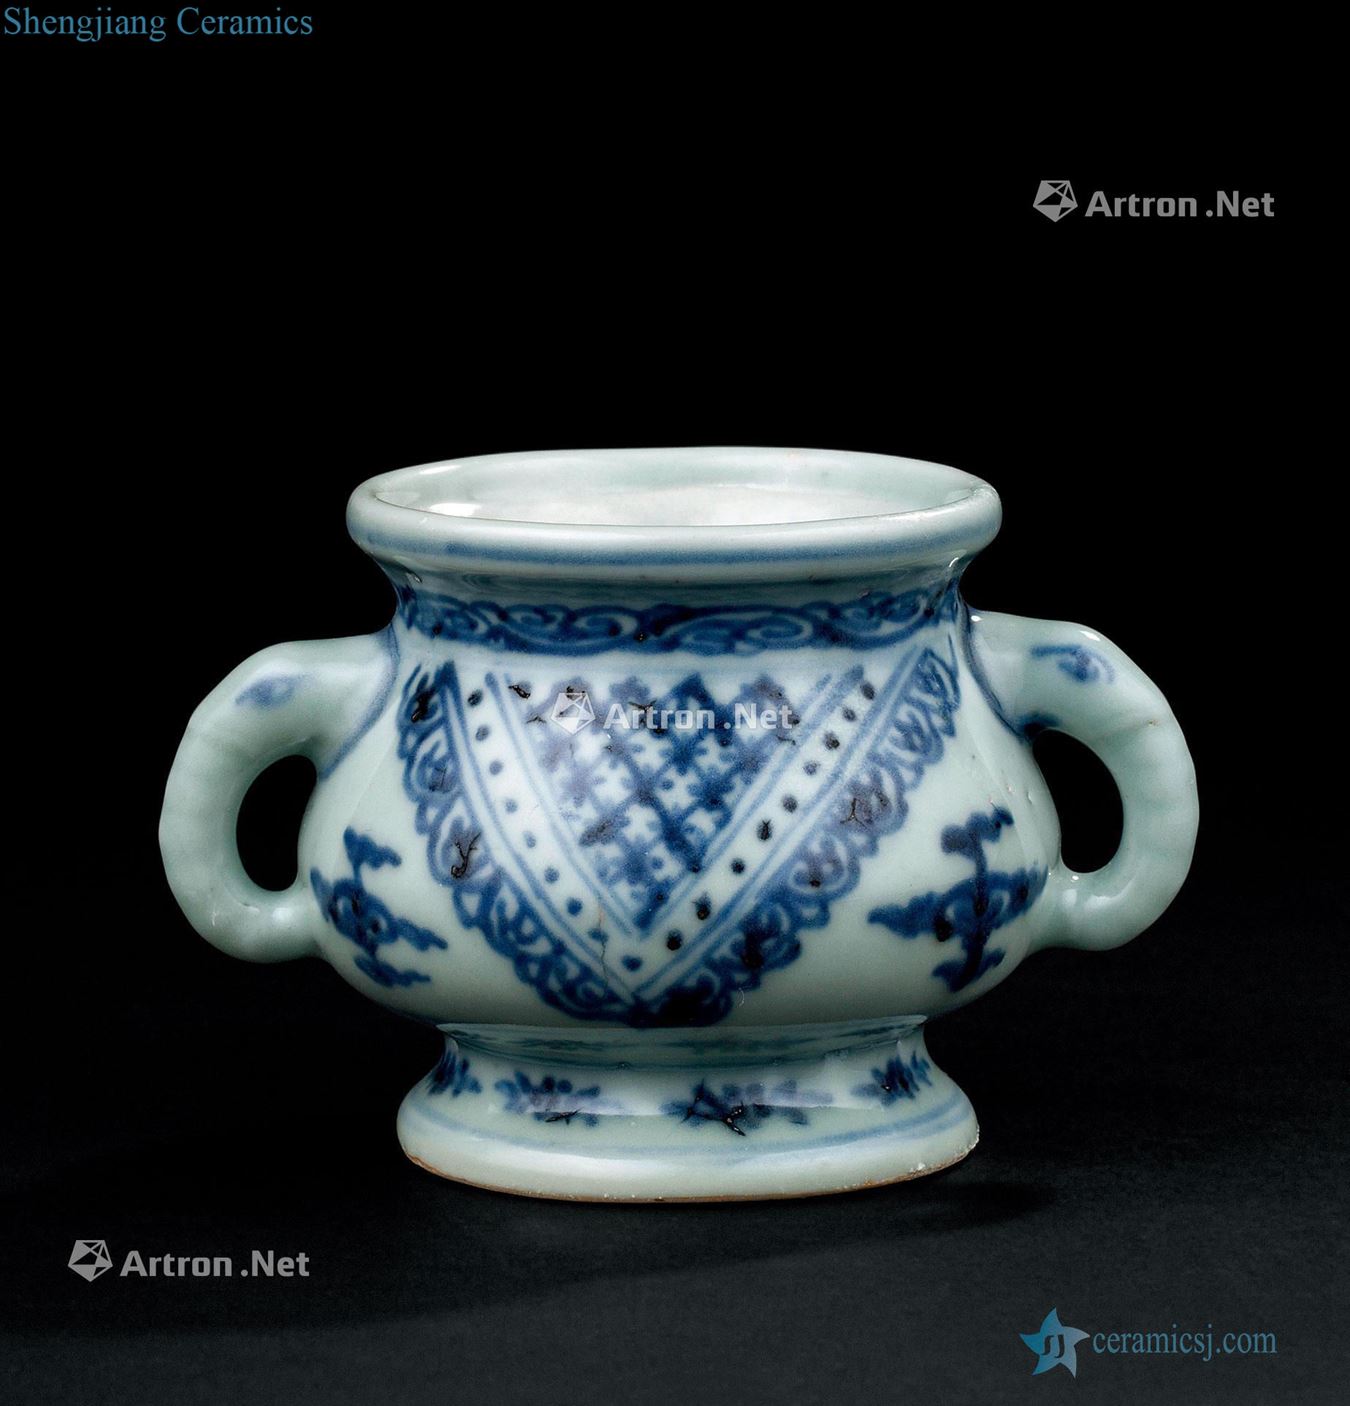 In the Ming dynasty (1368-1644) blue and white imitation bronze grain double elephant censer